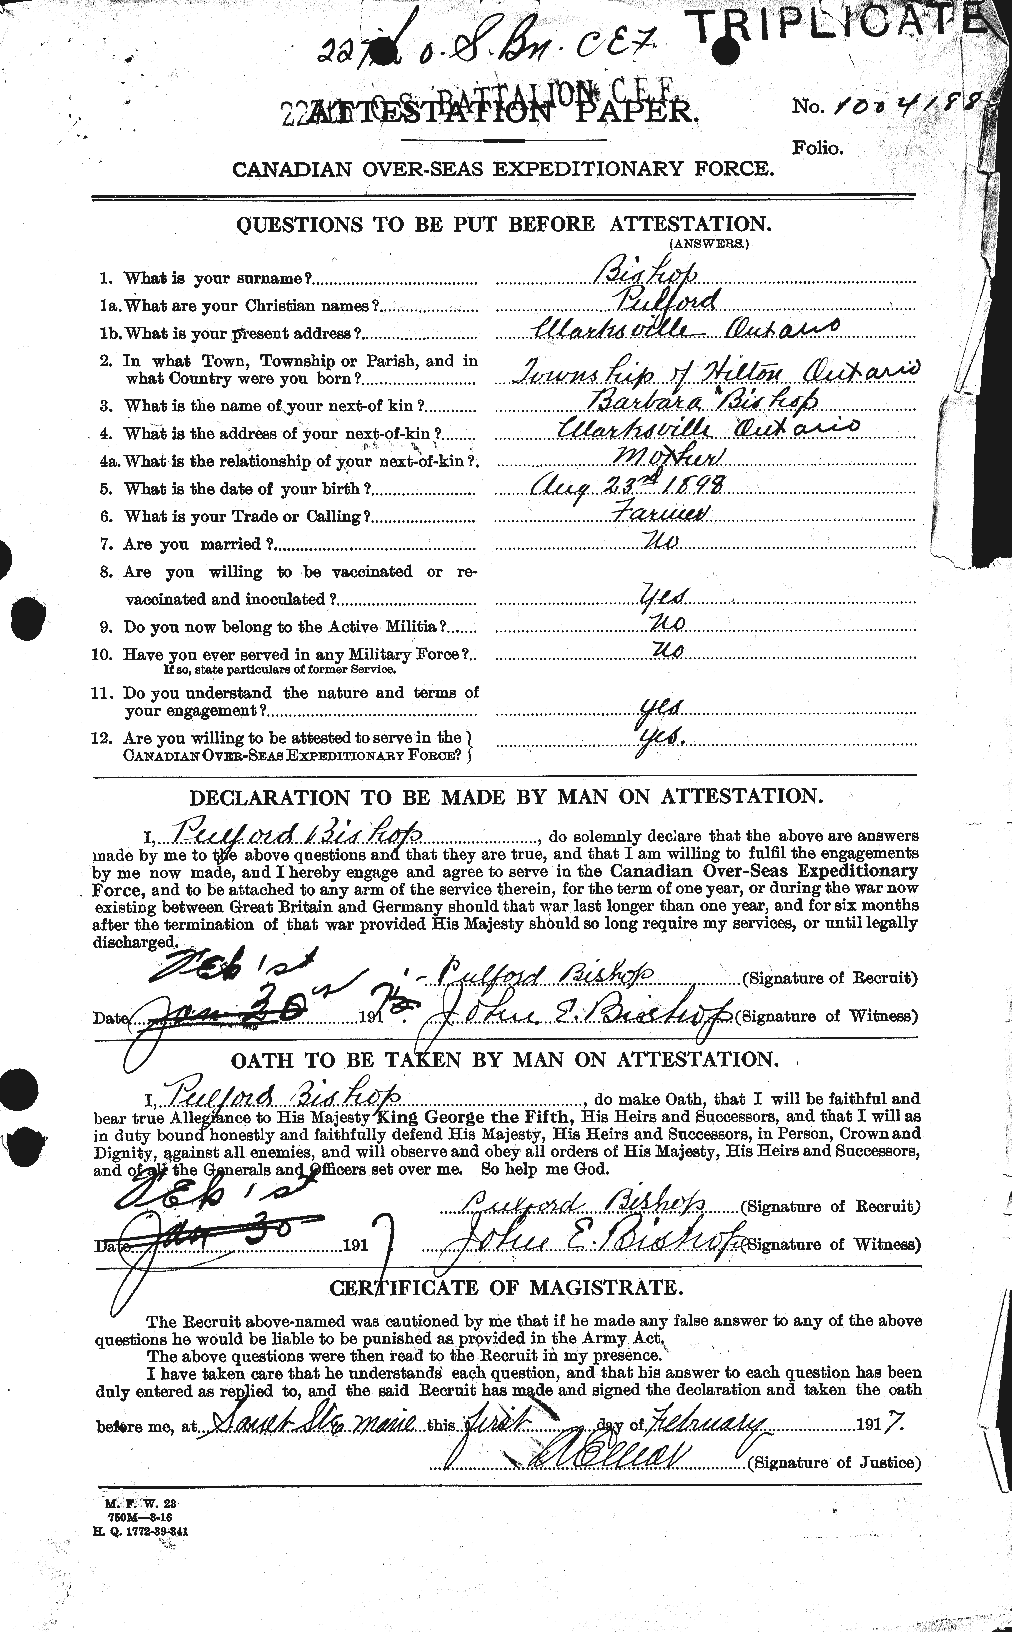 Personnel Records of the First World War - CEF 245574a